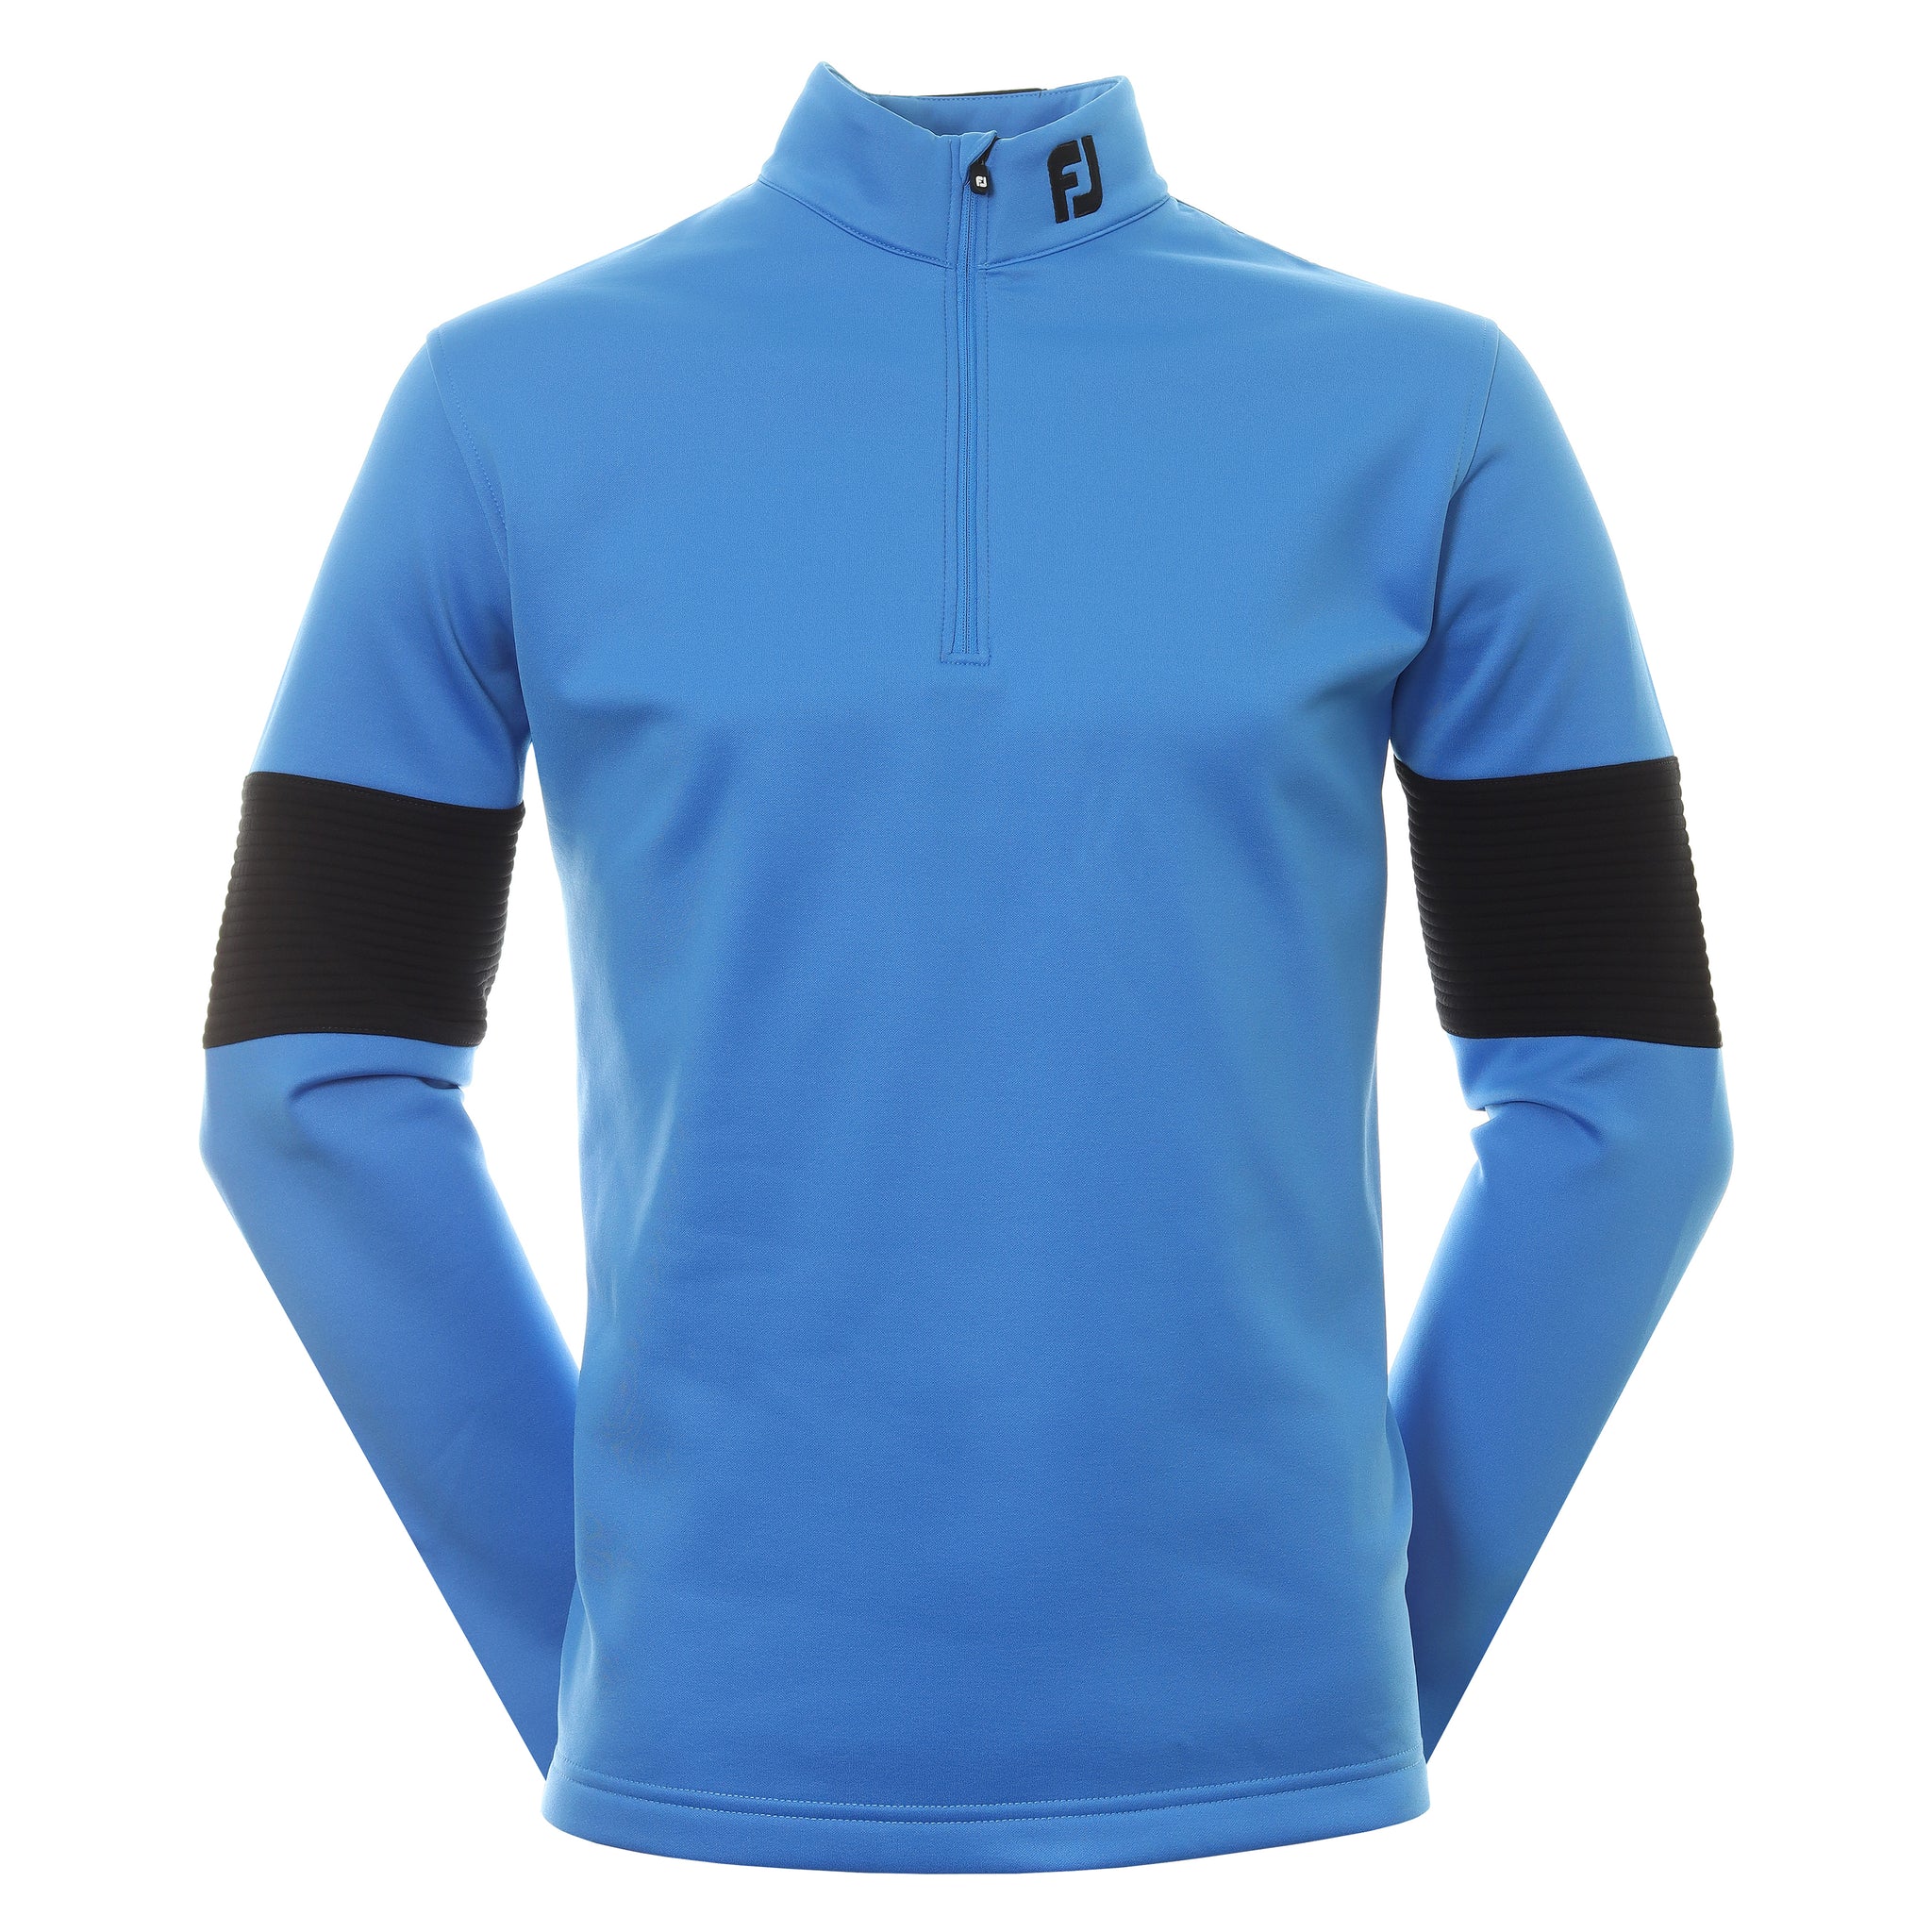 footjoy-ribbed-xp-chill-out-pullover-88832-sapphire-black